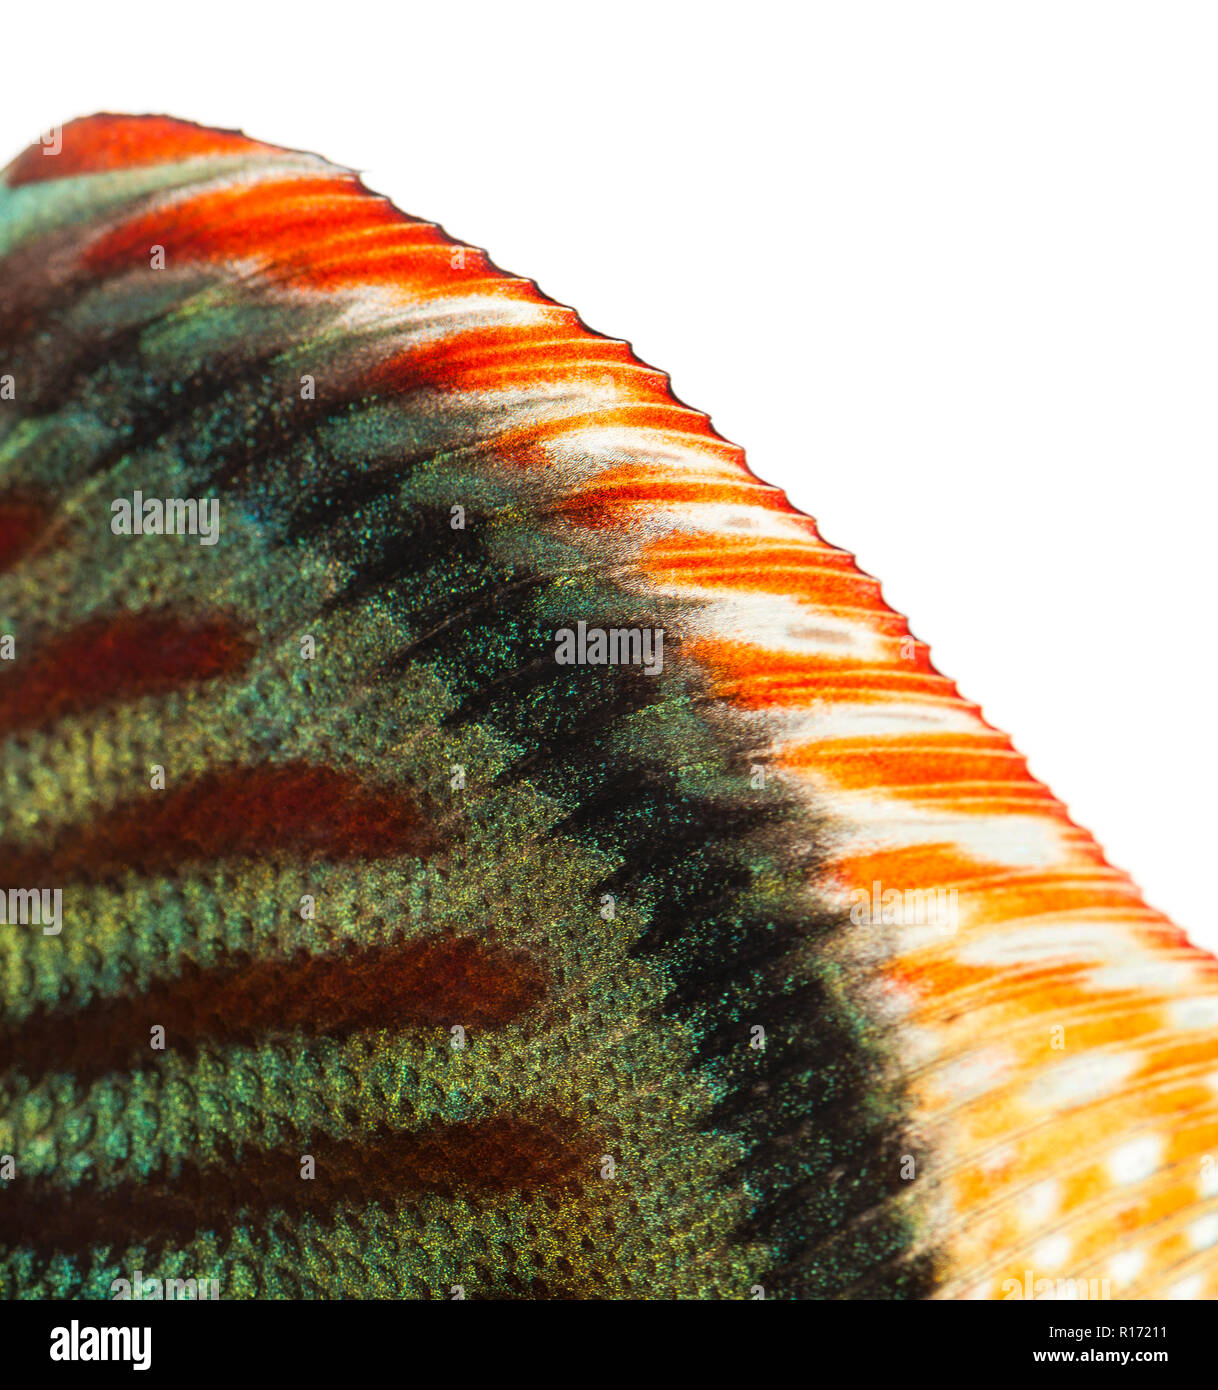 Close-up of a Blue snakeskin discus' dorsal fin, Symphysodon aequifasciatus, isolated on white Stock Photo